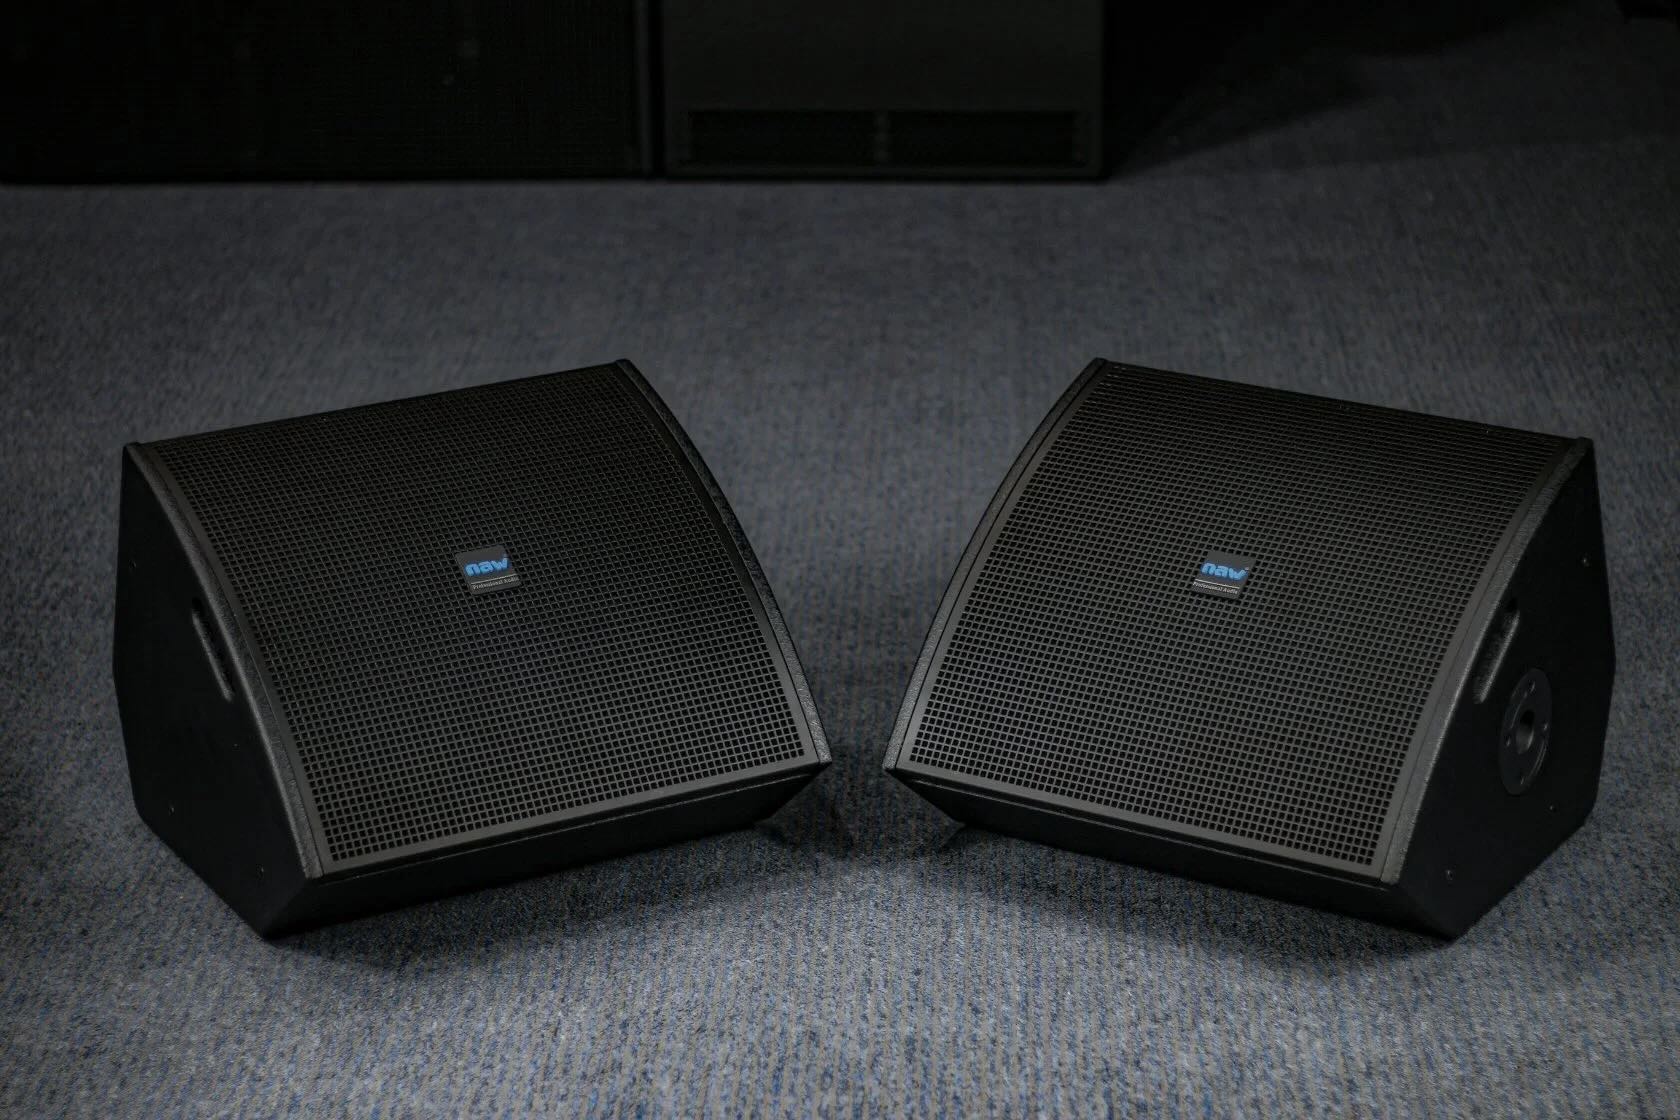 Stage Monitor Speakers: A Comprehensive Review